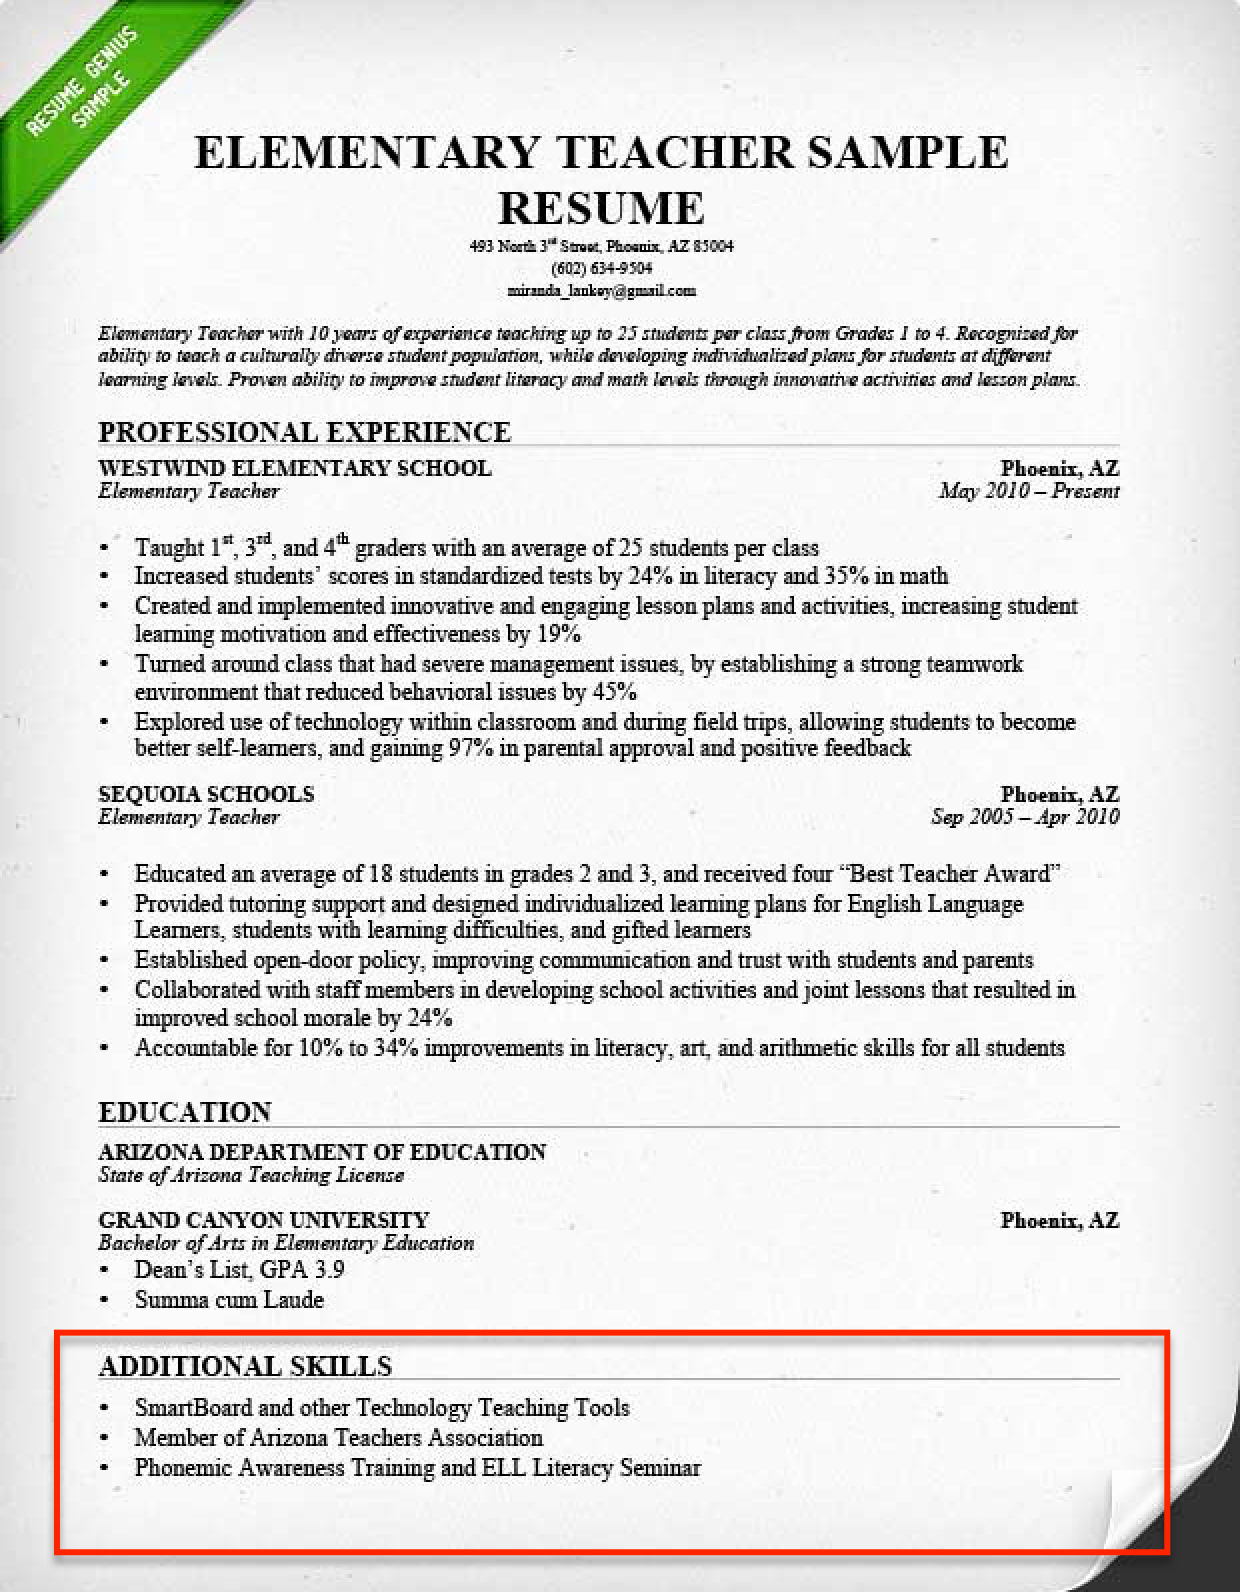 Resume Skills Section 250 Skills for Your Resume